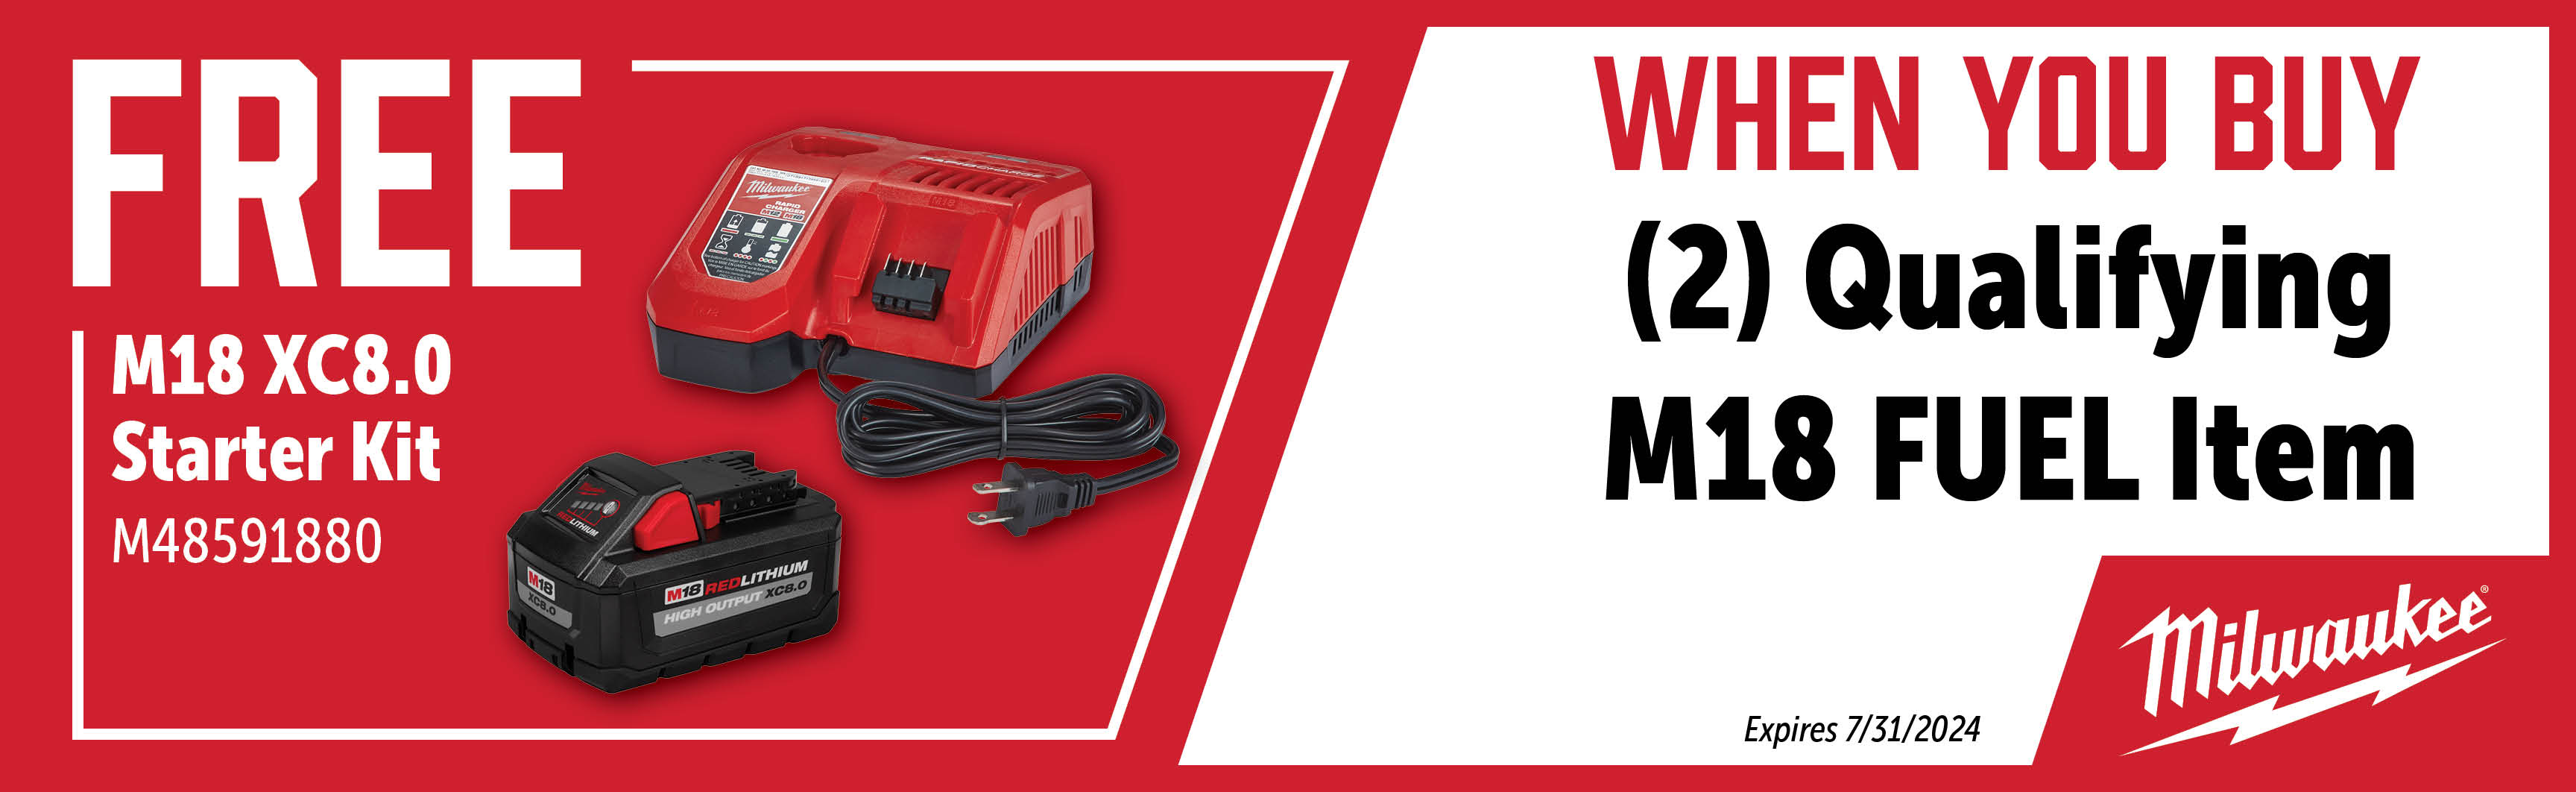 Milwaukee May - July: Buy 2 Qualifying M18 Items and Get a Free M48591880